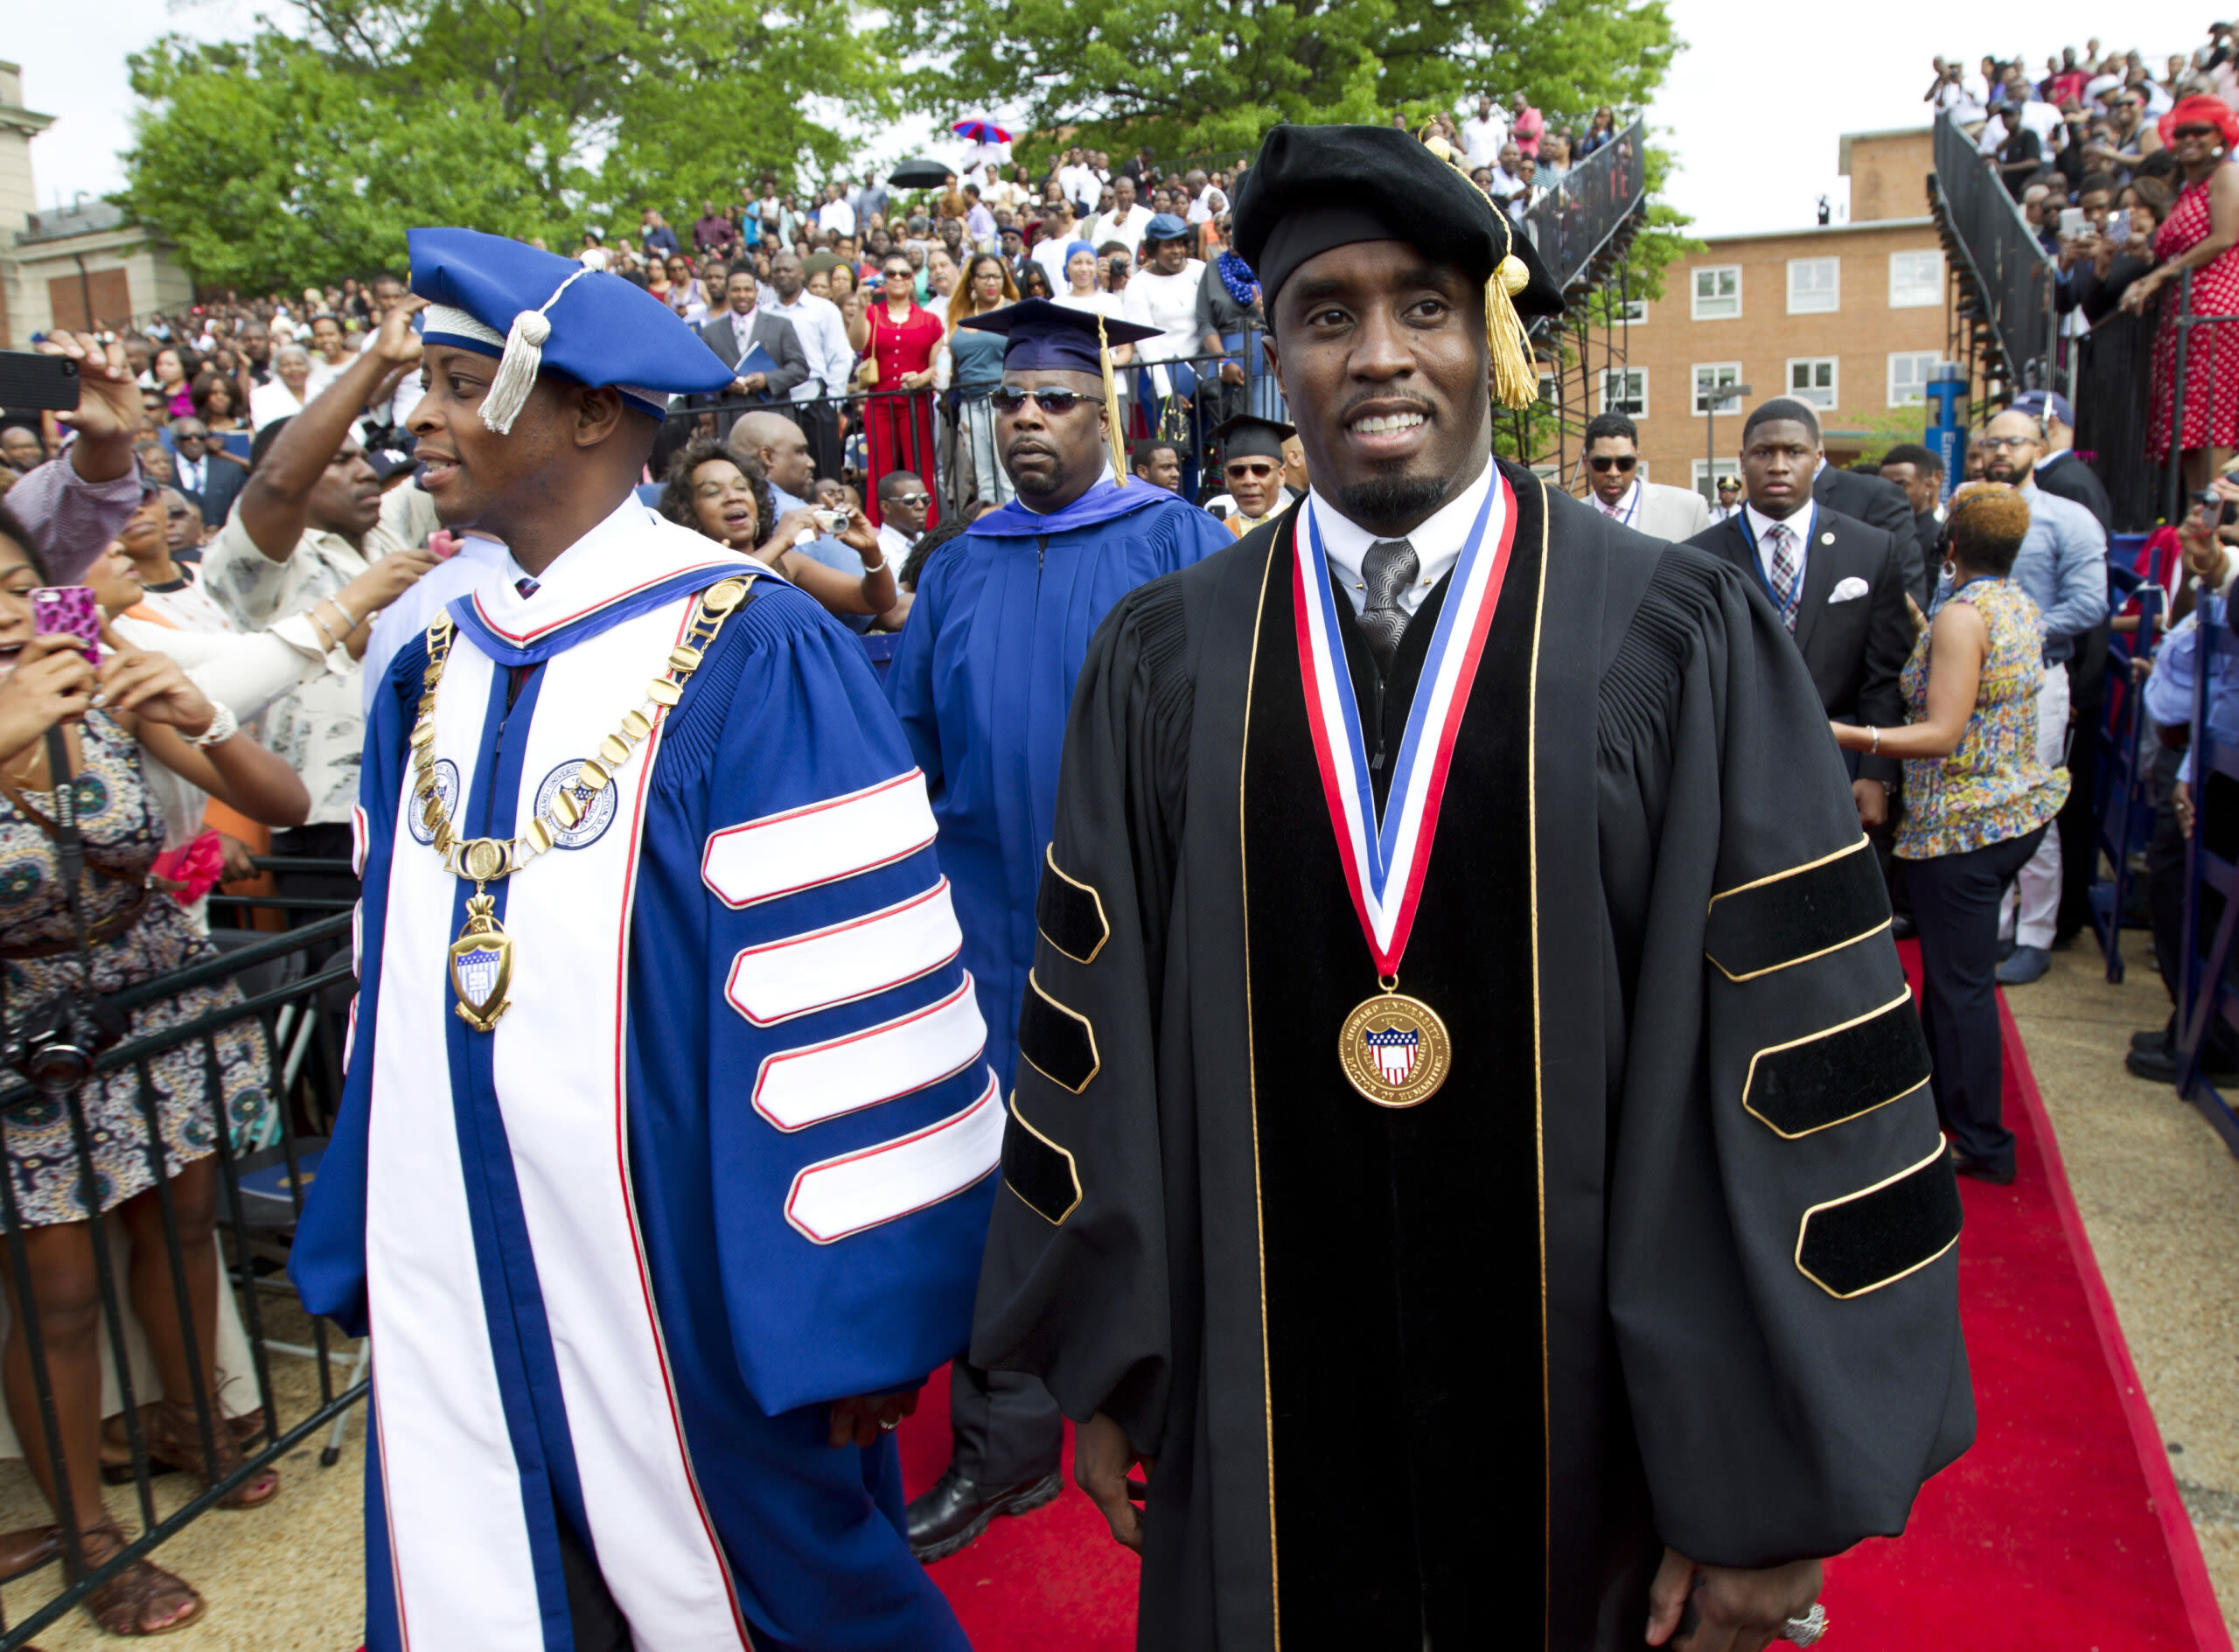 Howard University revokes Sean Combs’ honorary degree and terminates $2 million gift and pledge agreement - WTOP News